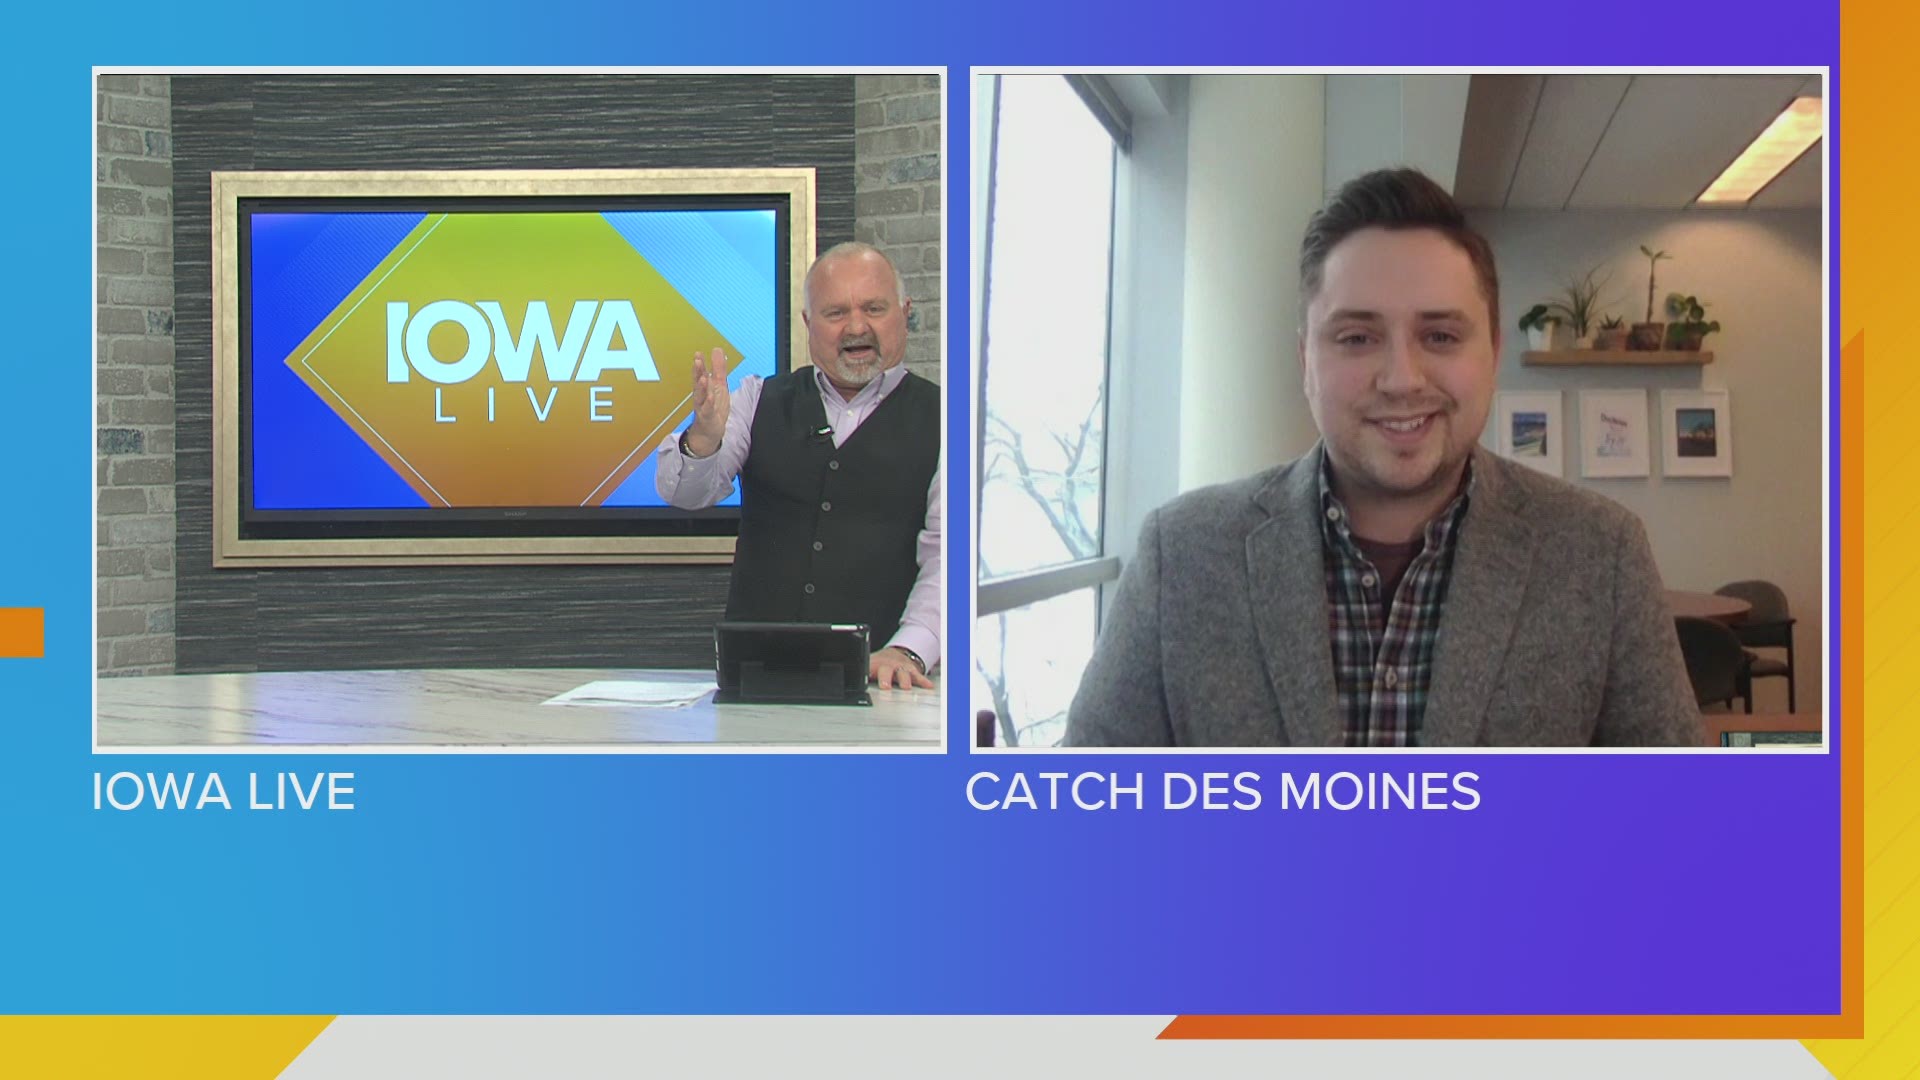 Brock Conrad from Catch Des Moines fills us in on happenings in the Des Moines Metro this weekend including Wild Hockey, Dome After Dark & Dueling Fiddles